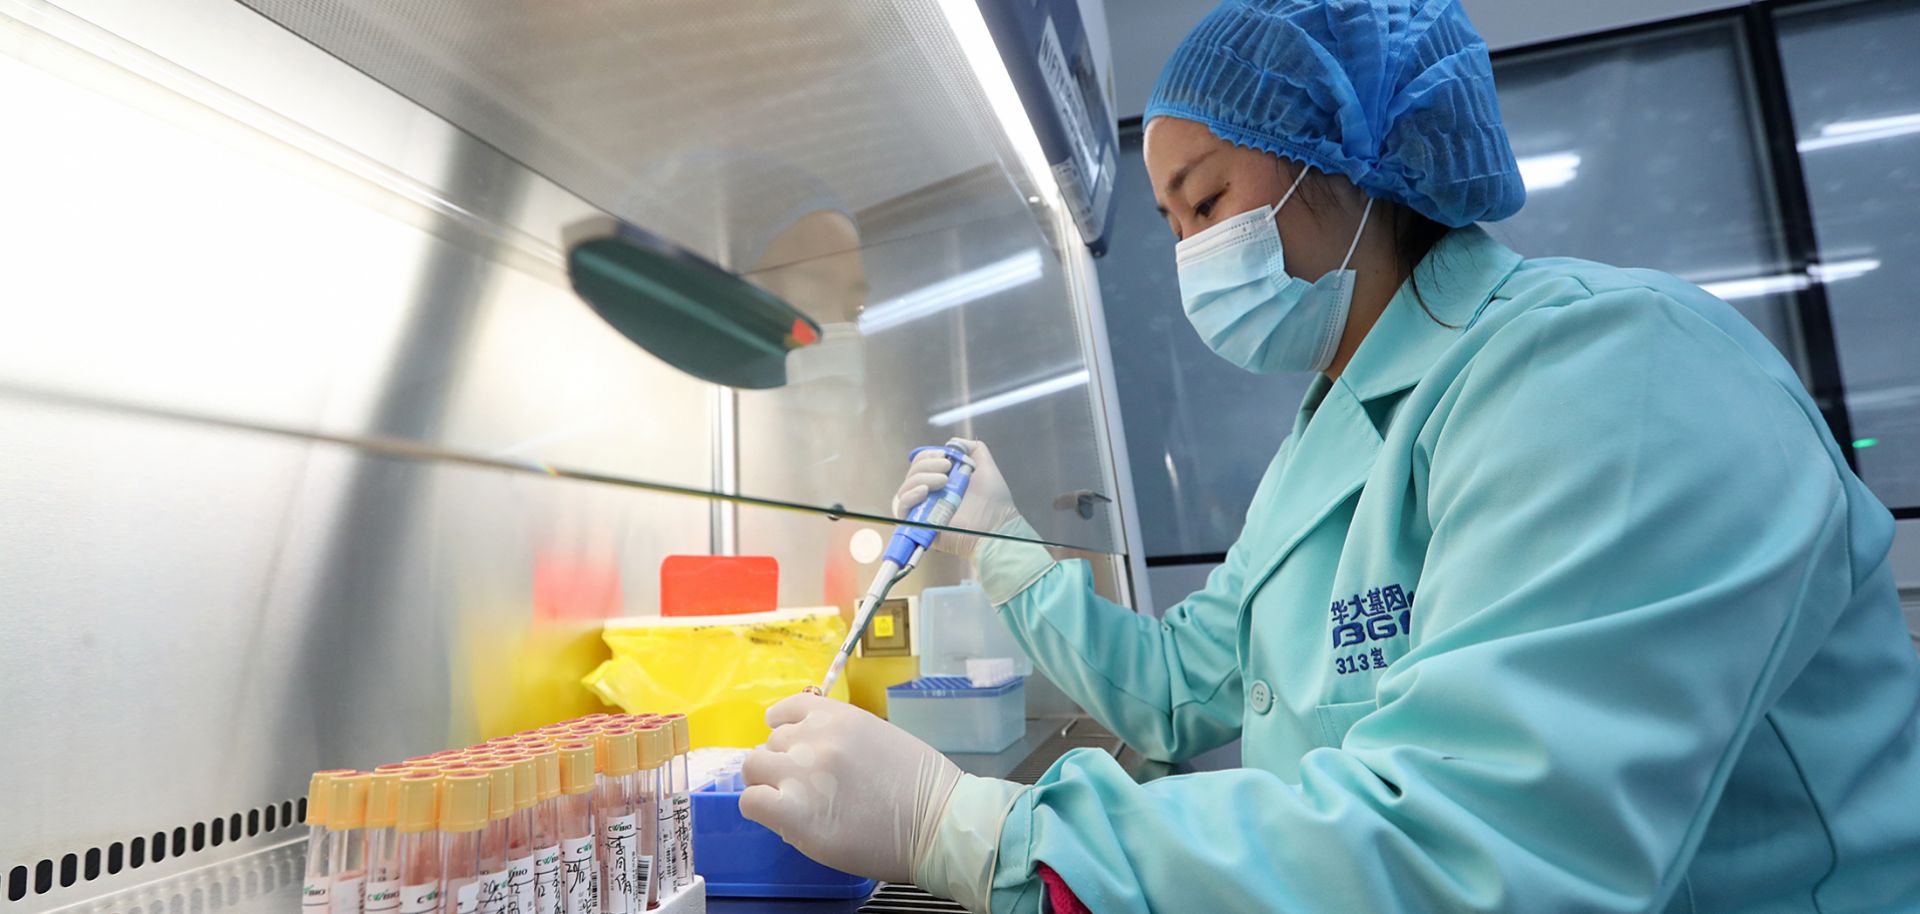 This Dec. 26, 2018, photo shows a researcher working in a Beijing Genomics Institute laboratory in Kunming, China.